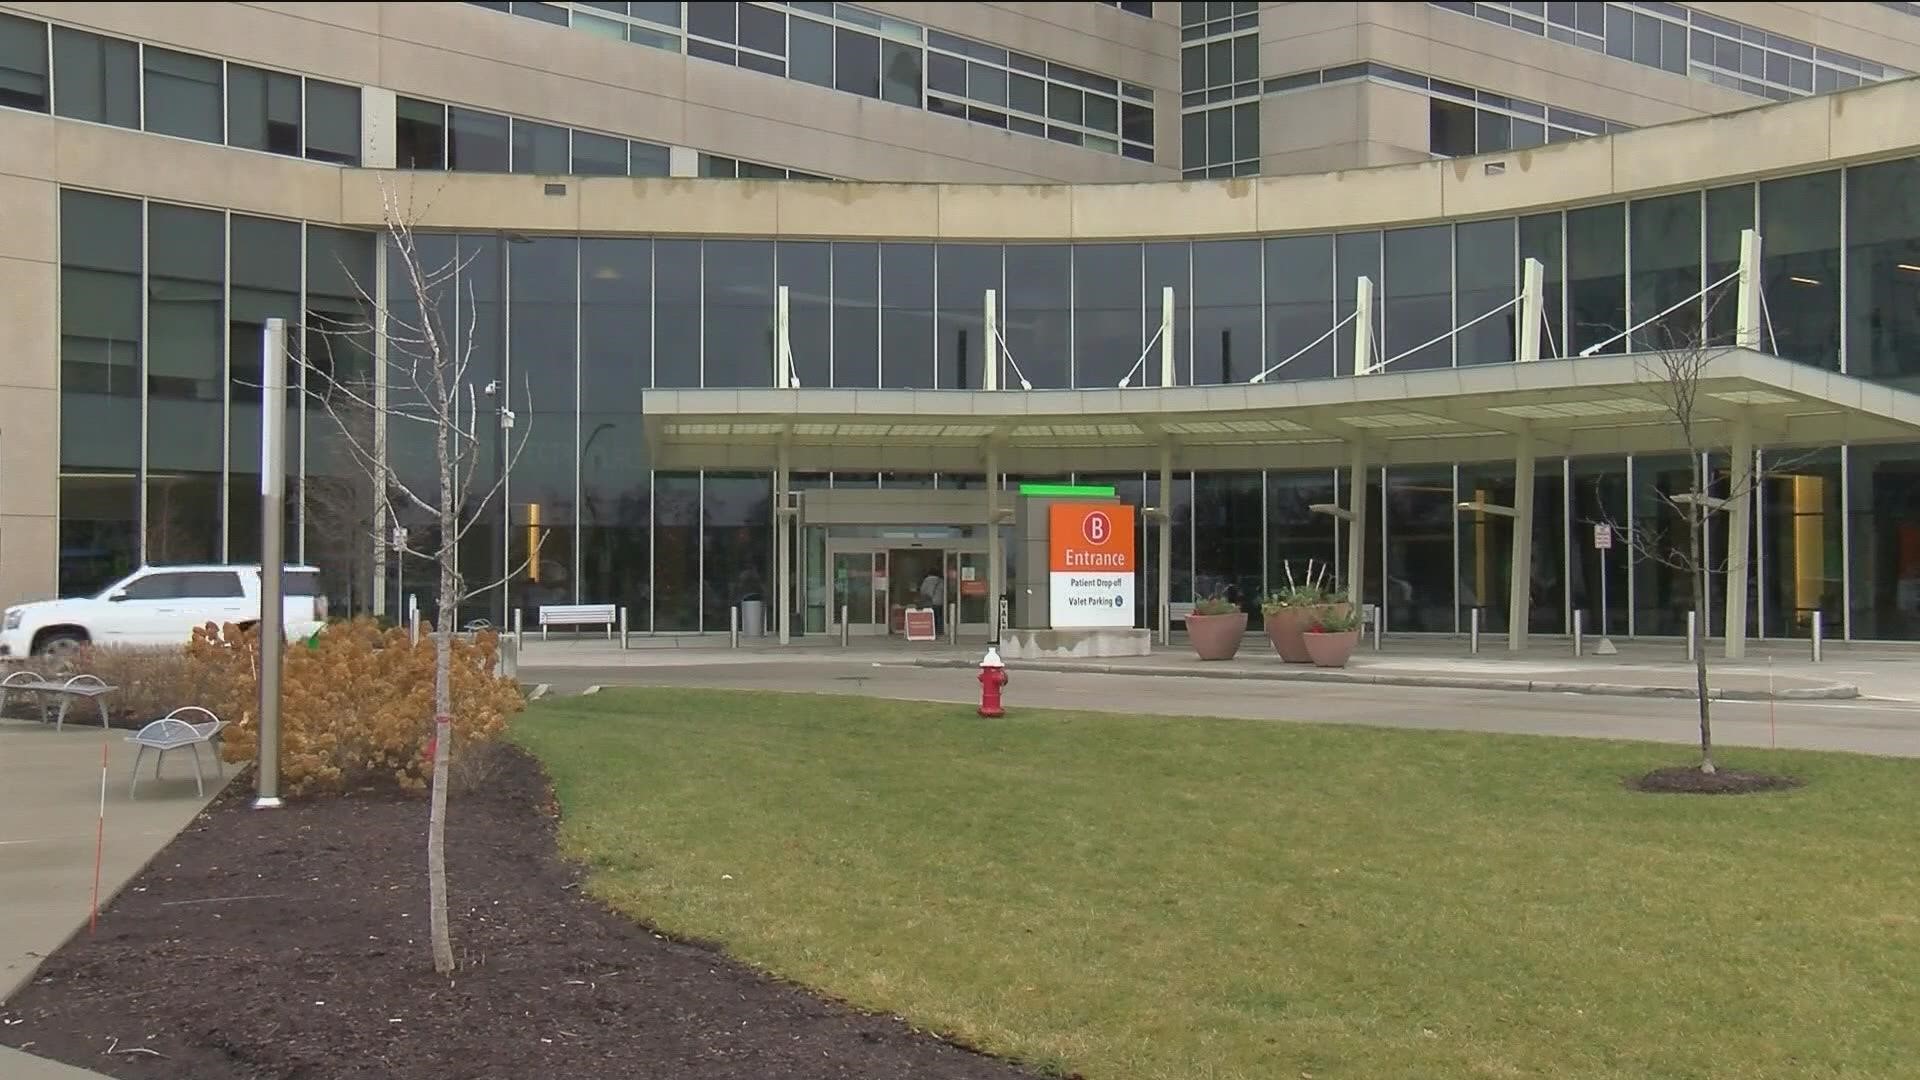 Healthcare provider ProMedica announced Thursday they will layoff over 250 nursing employees, some of which work at a location in downtown Toledo.